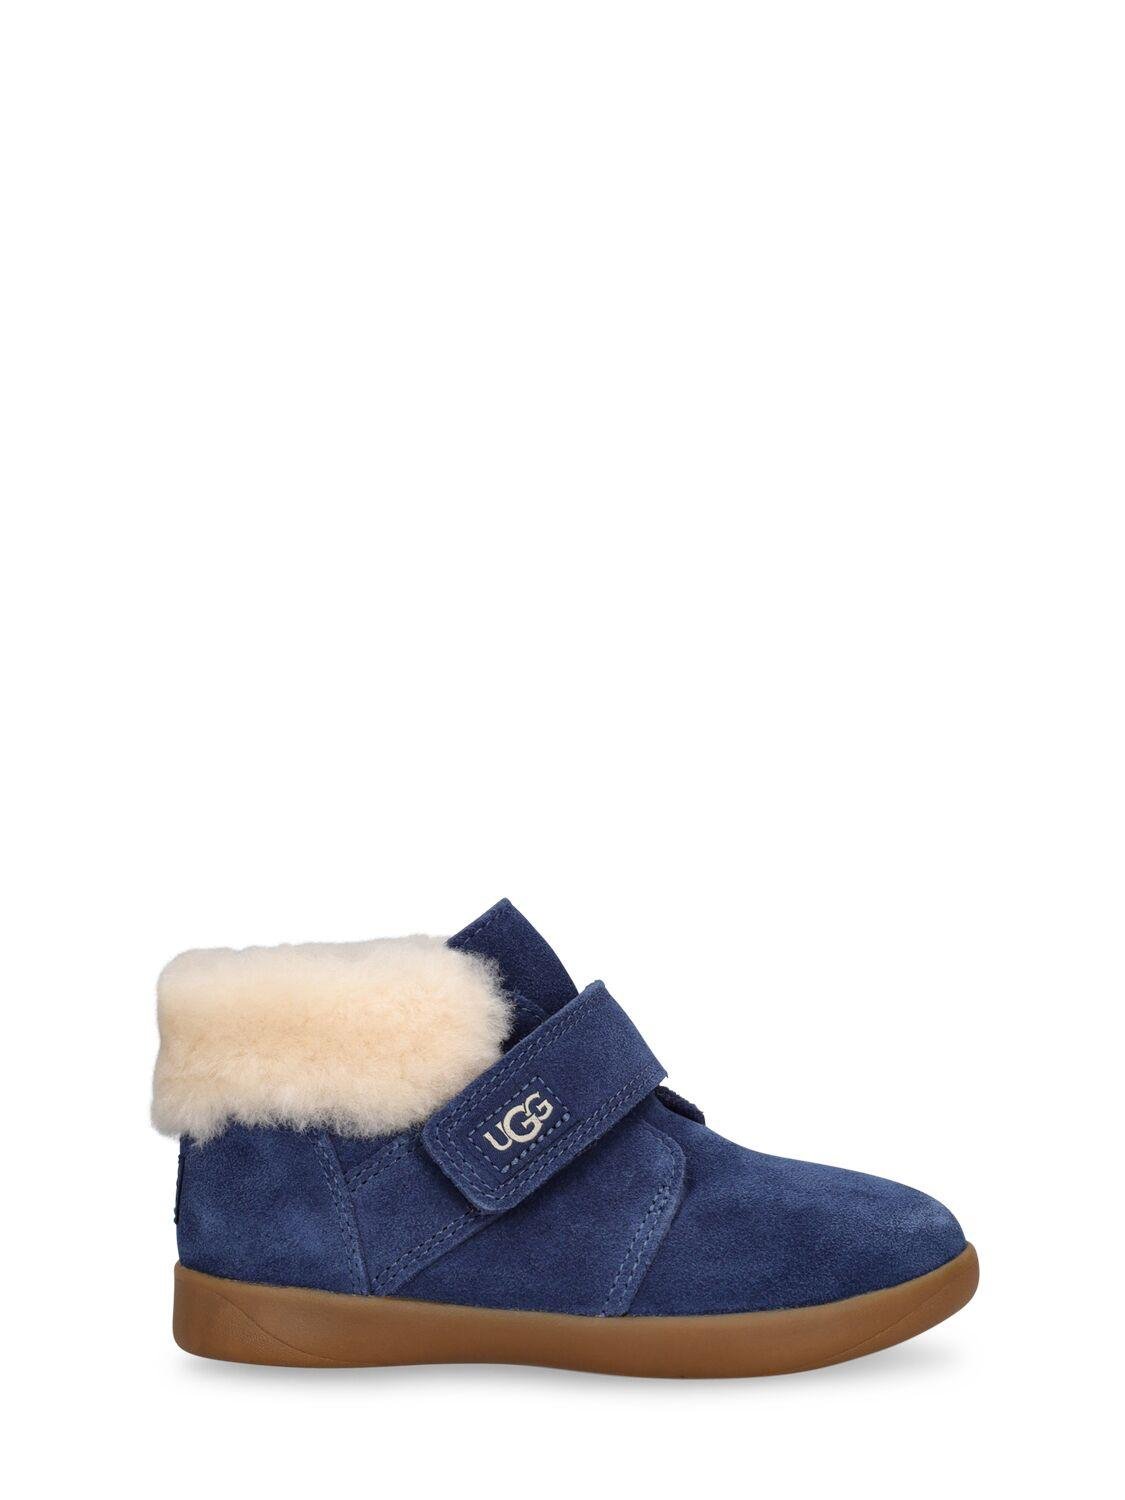 Nolen Shearling Boots by UGG